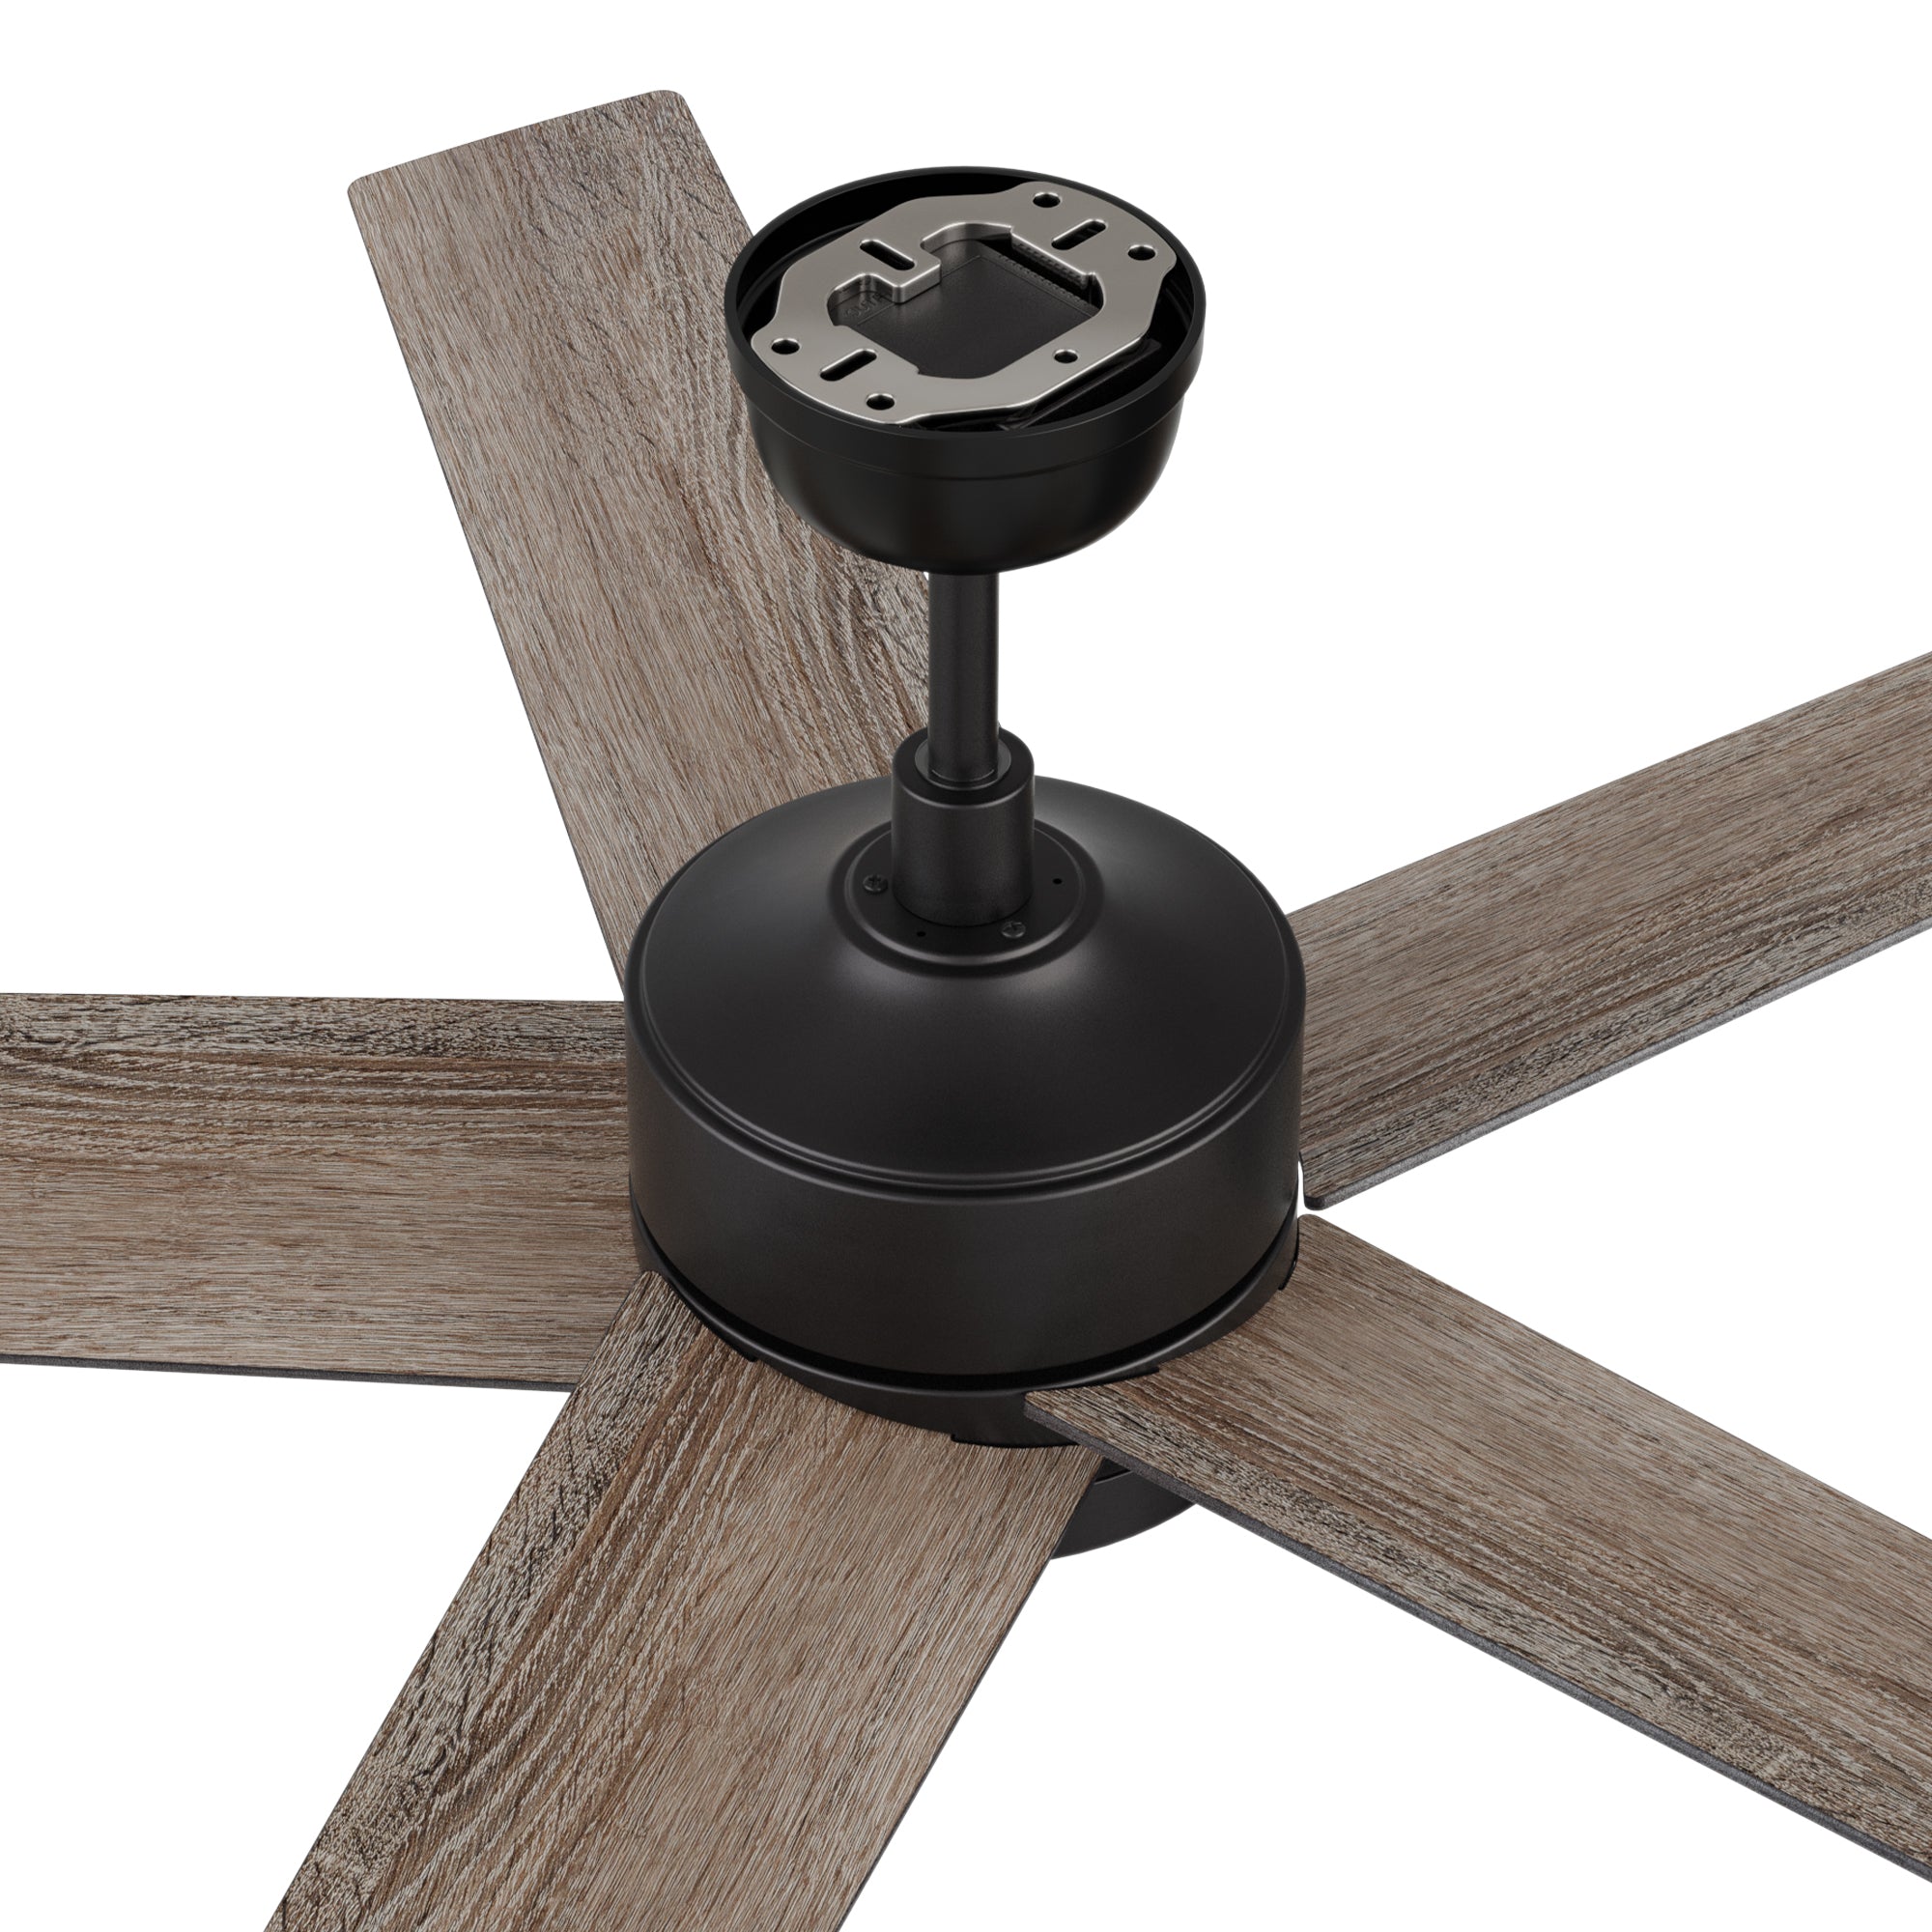 52in Black Ceiling Fan. Downrod mounted, whisper-quiet, and reversible airflow. 